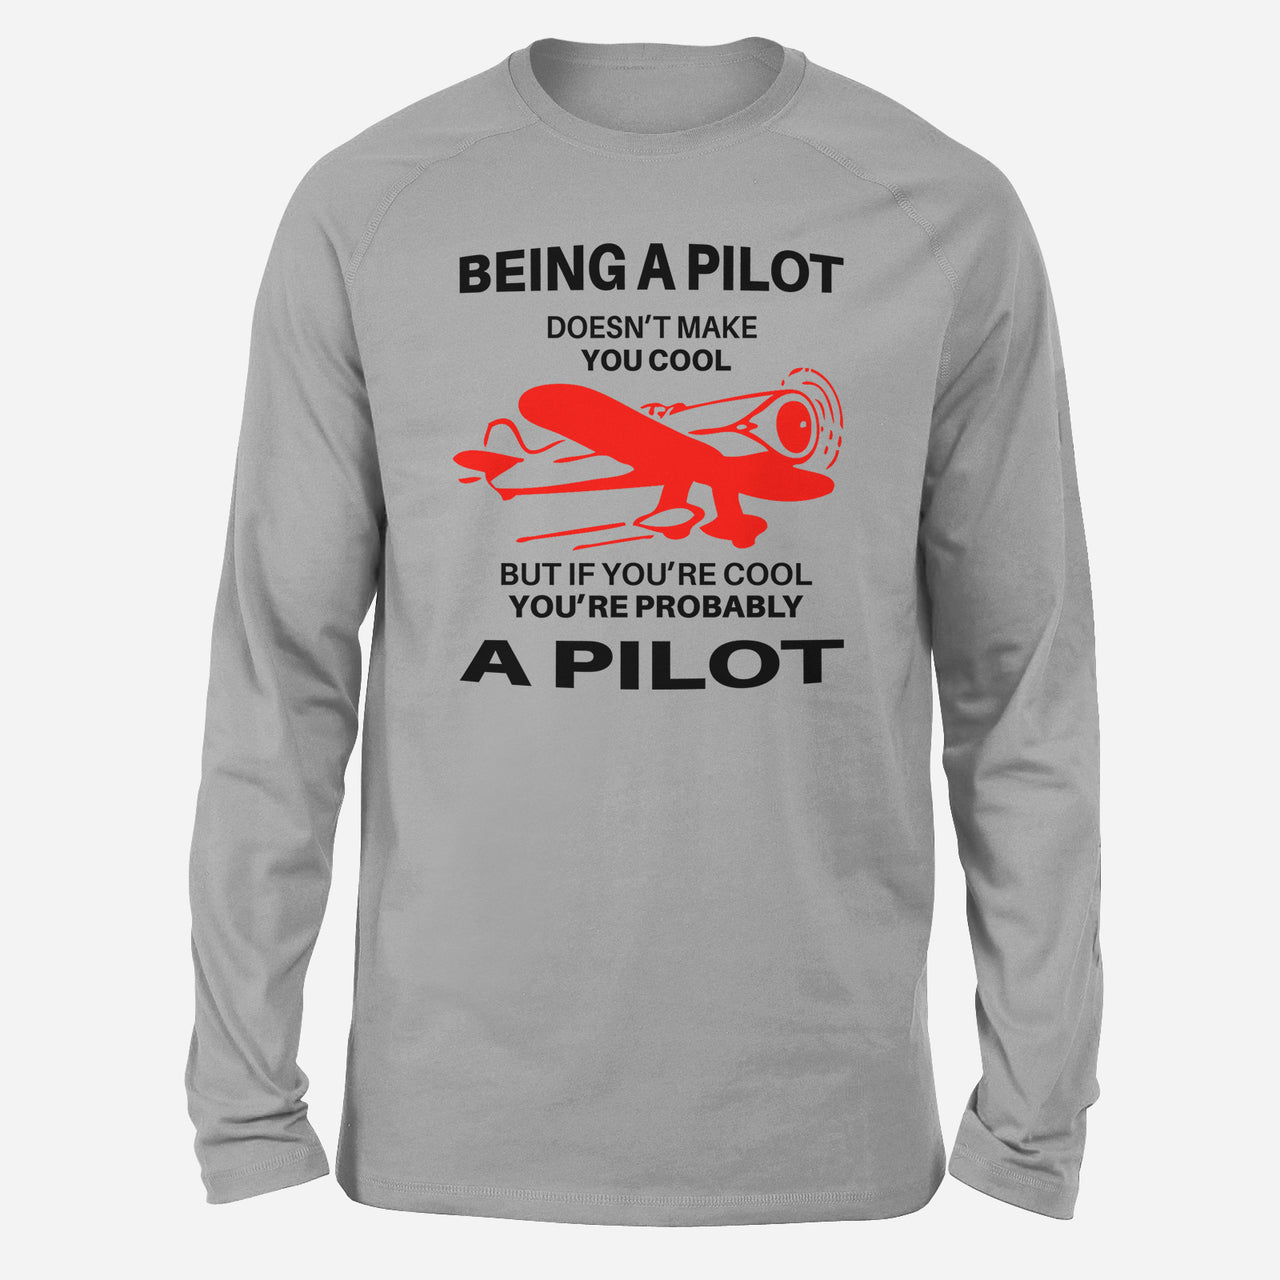 If You're Cool You're Probably a Pilot Designed Long-Sleeve T-Shirts